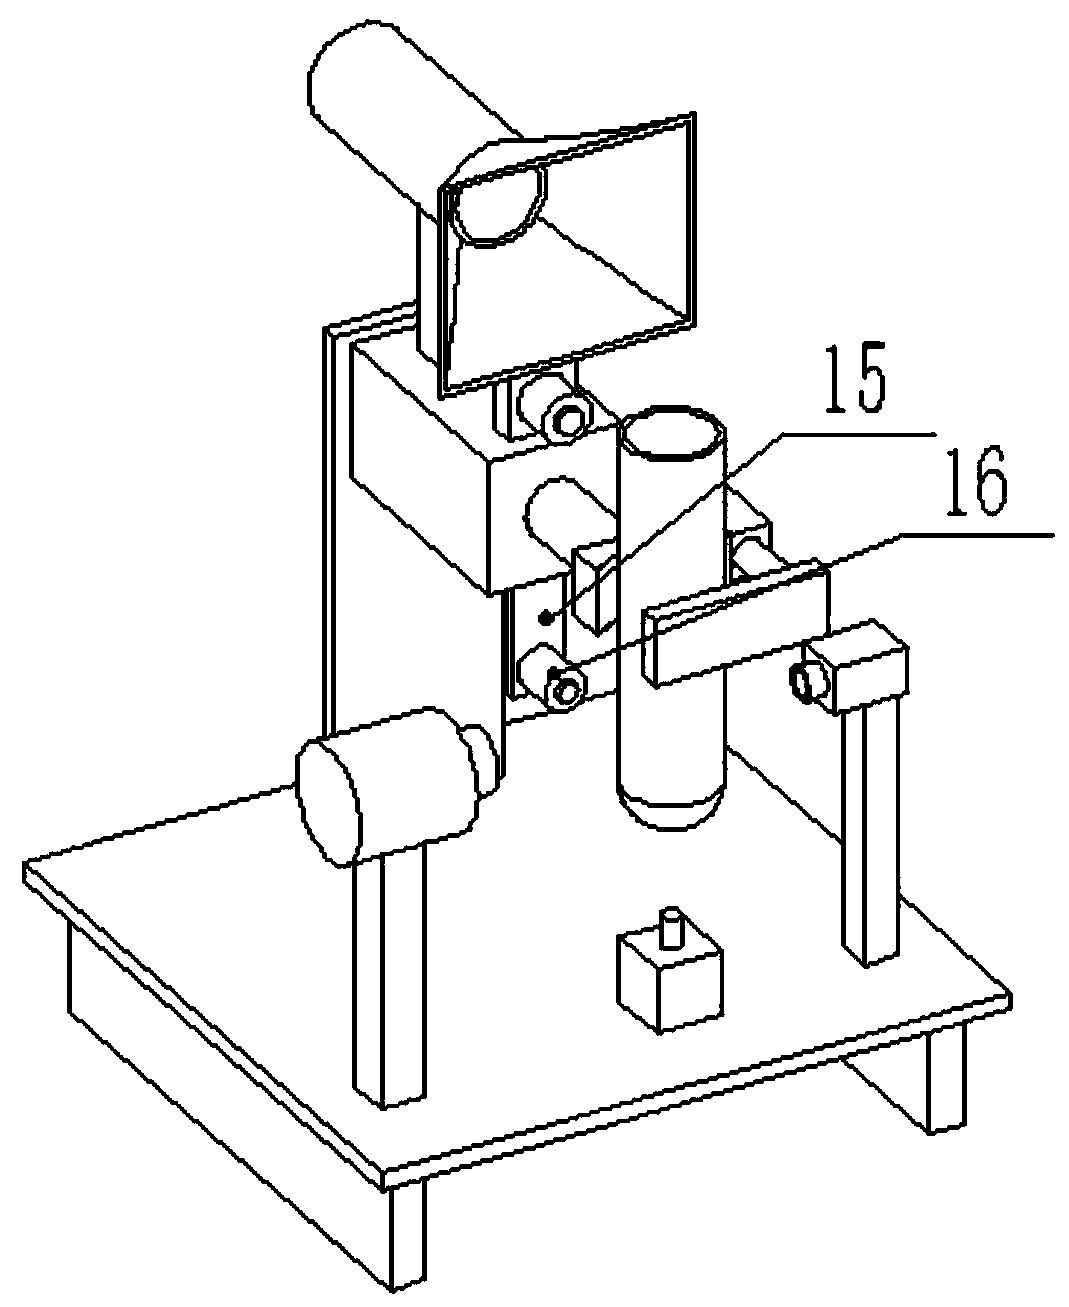 Test tube shaking device for medical tests